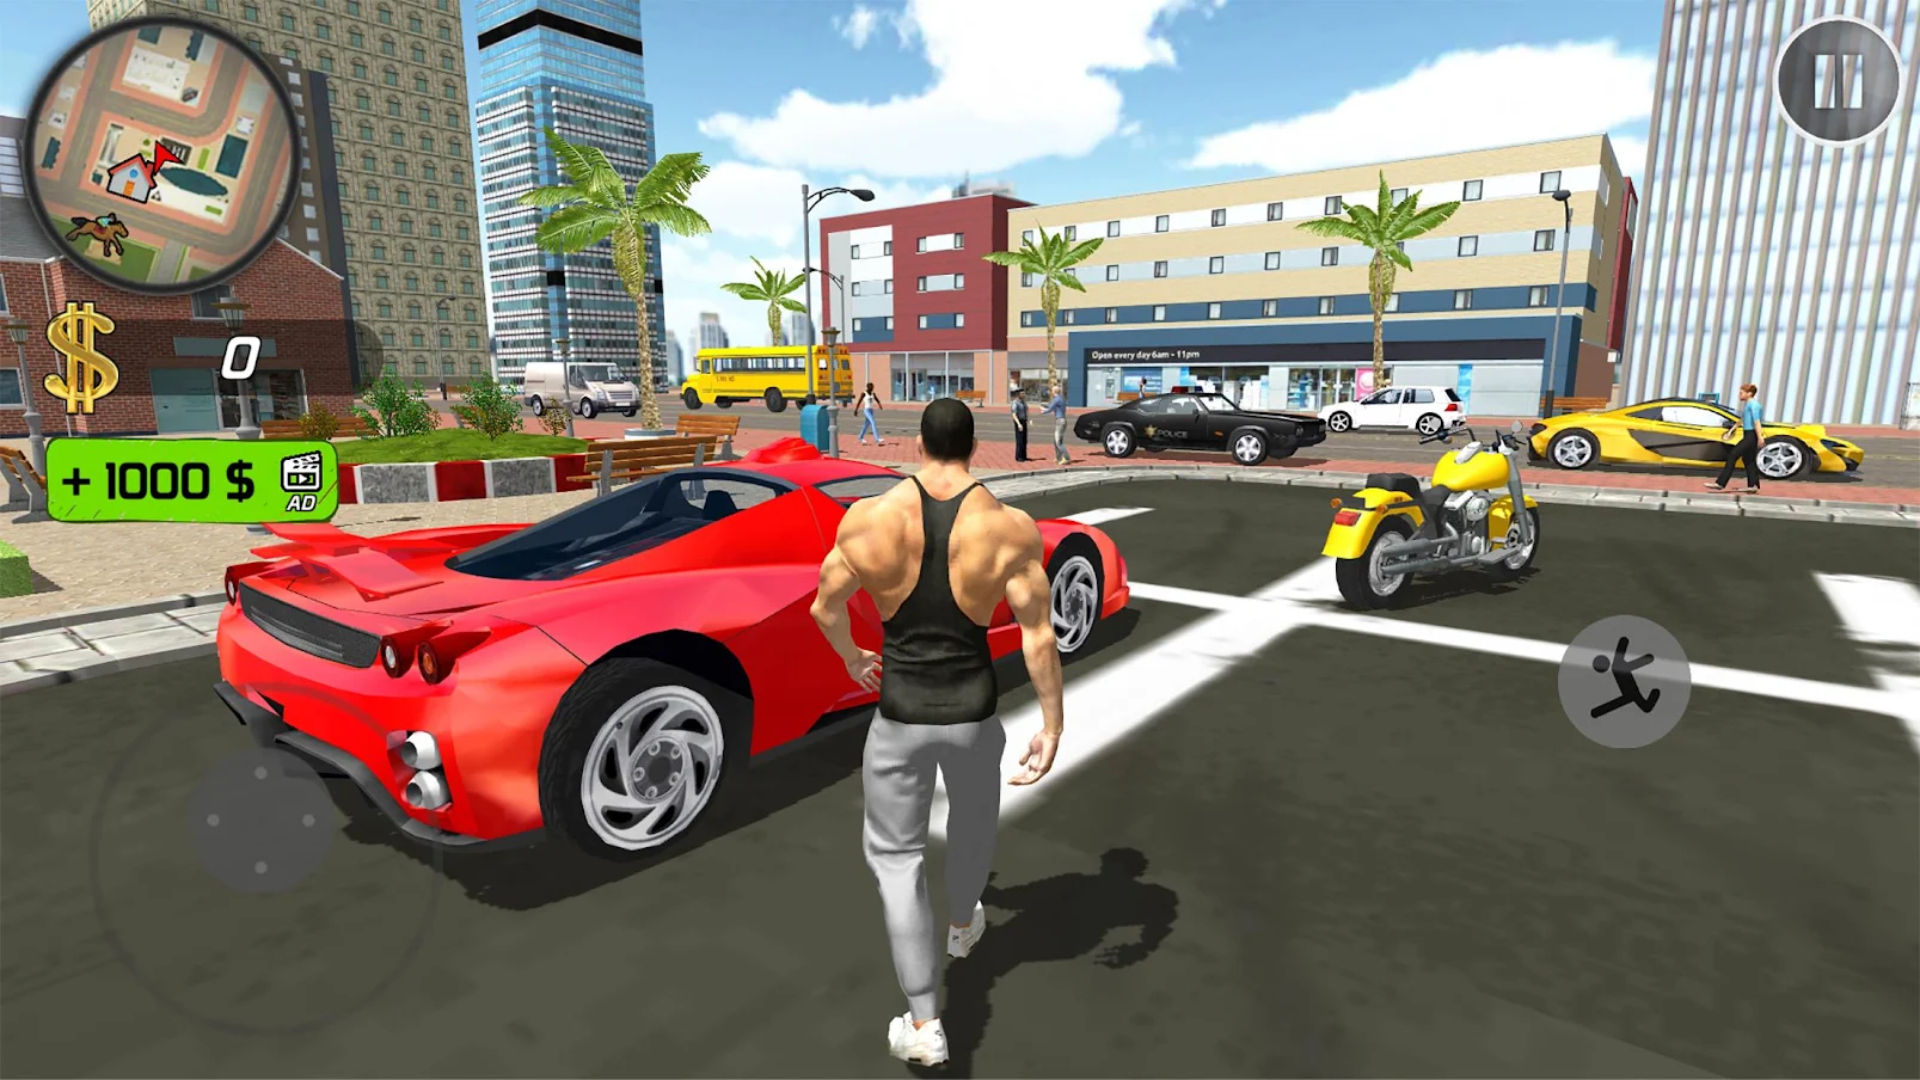 Top 6 Games Like GTA 5 That You Can Play On Your Smartphone